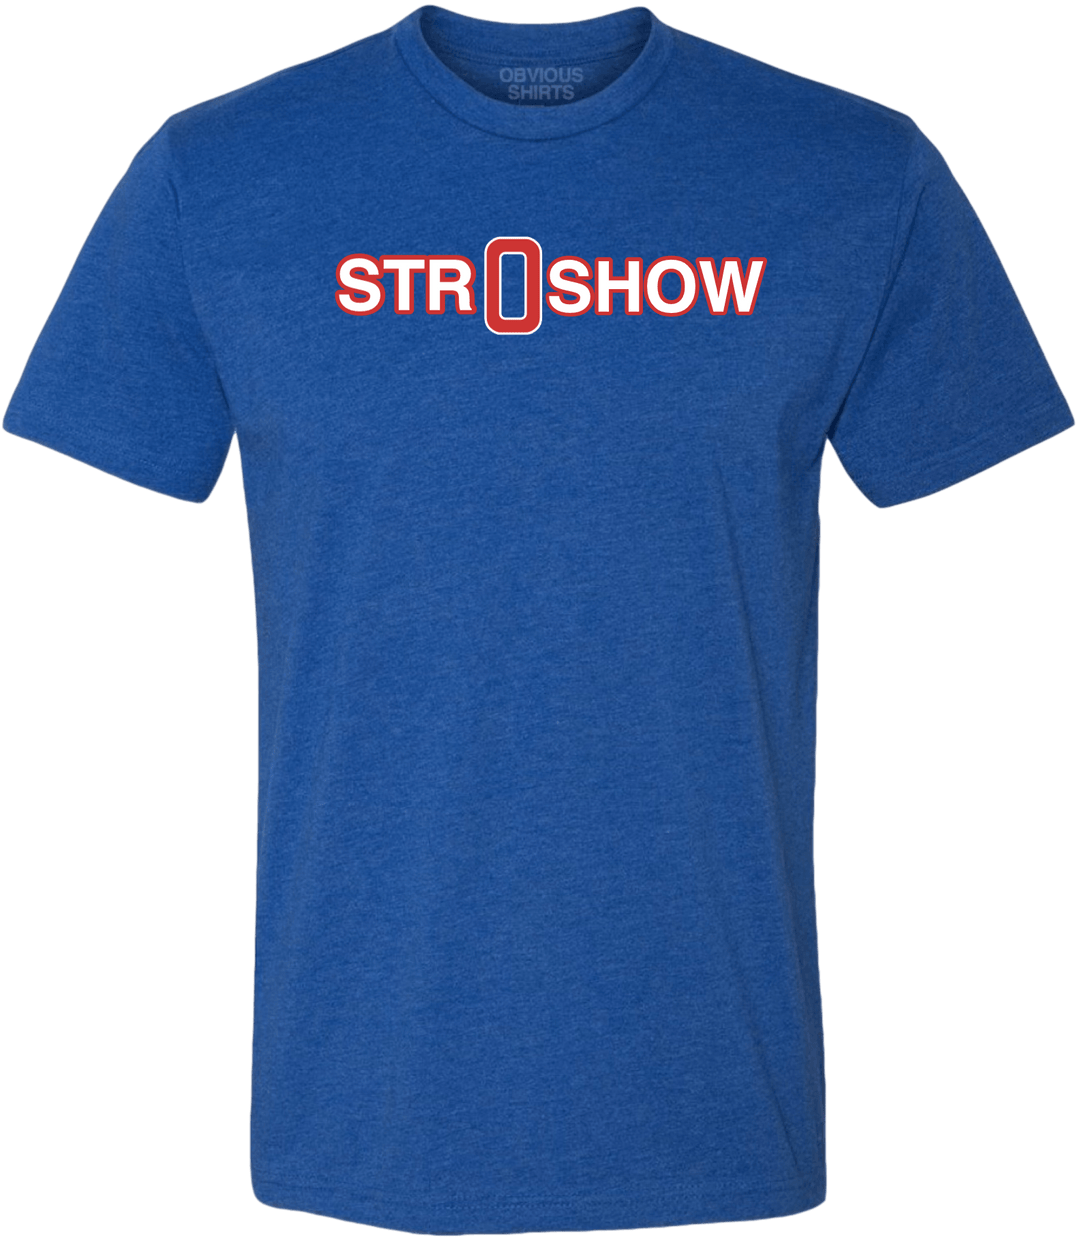 STR0SHOW (NUMBER 0) - OBVIOUS SHIRTS.